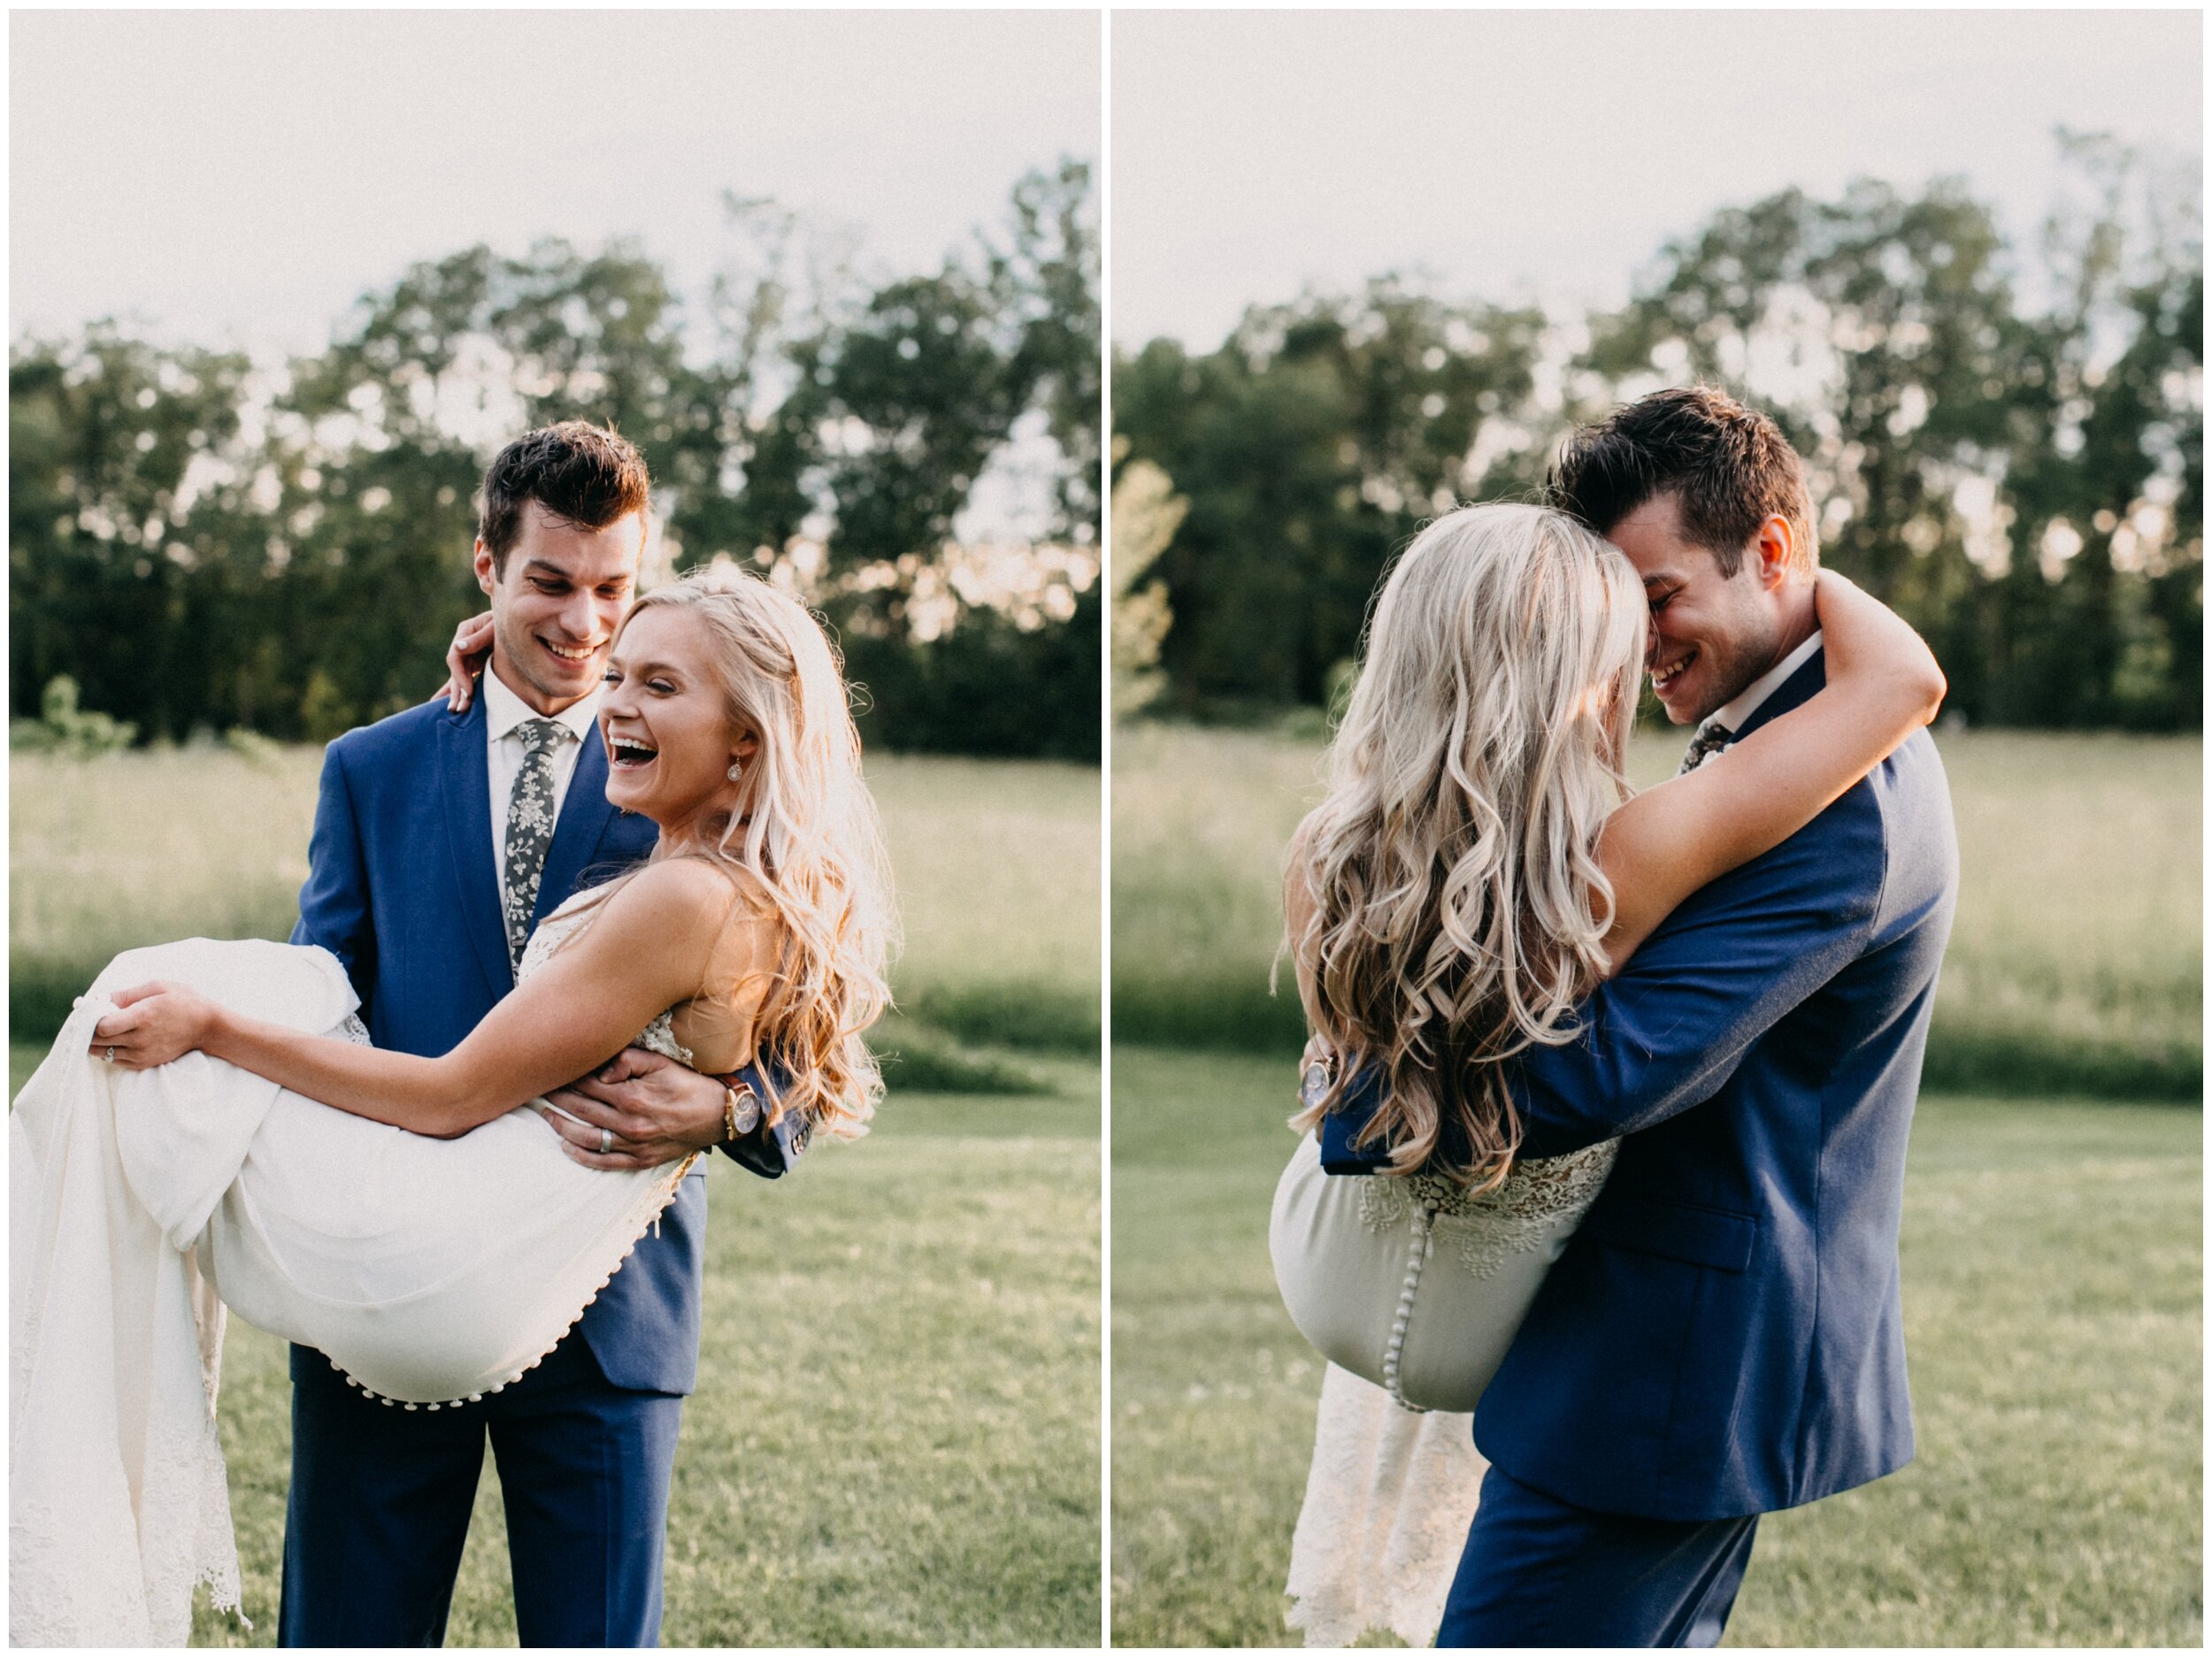 Groom carrying bride at sunset after Minnesota barn wedding